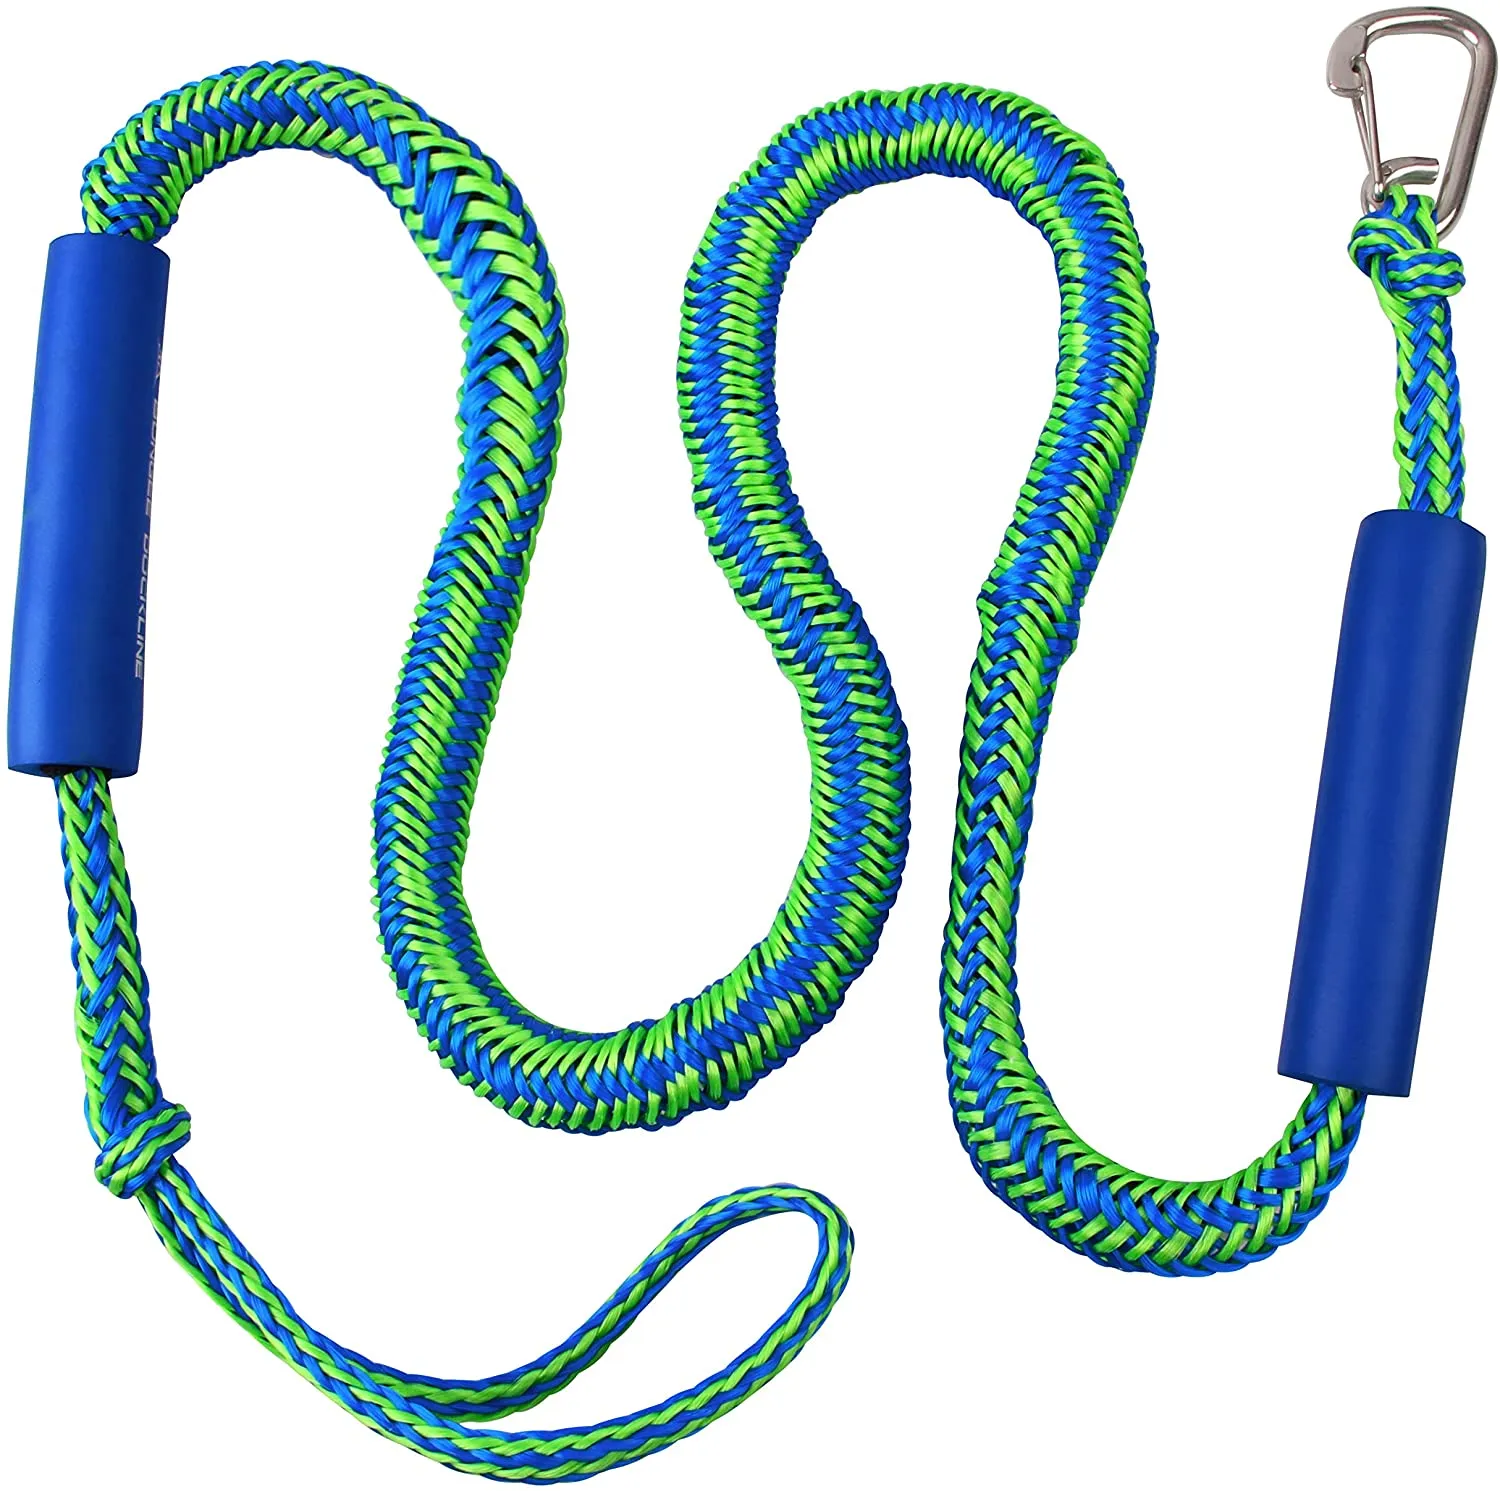 Fishing PWC Bungee Dock Lines Stretchable,2 Pack Bungee Cord with 316 Stainless Steel Clip, Foam Float Docking Rope Mooring Boat Rope